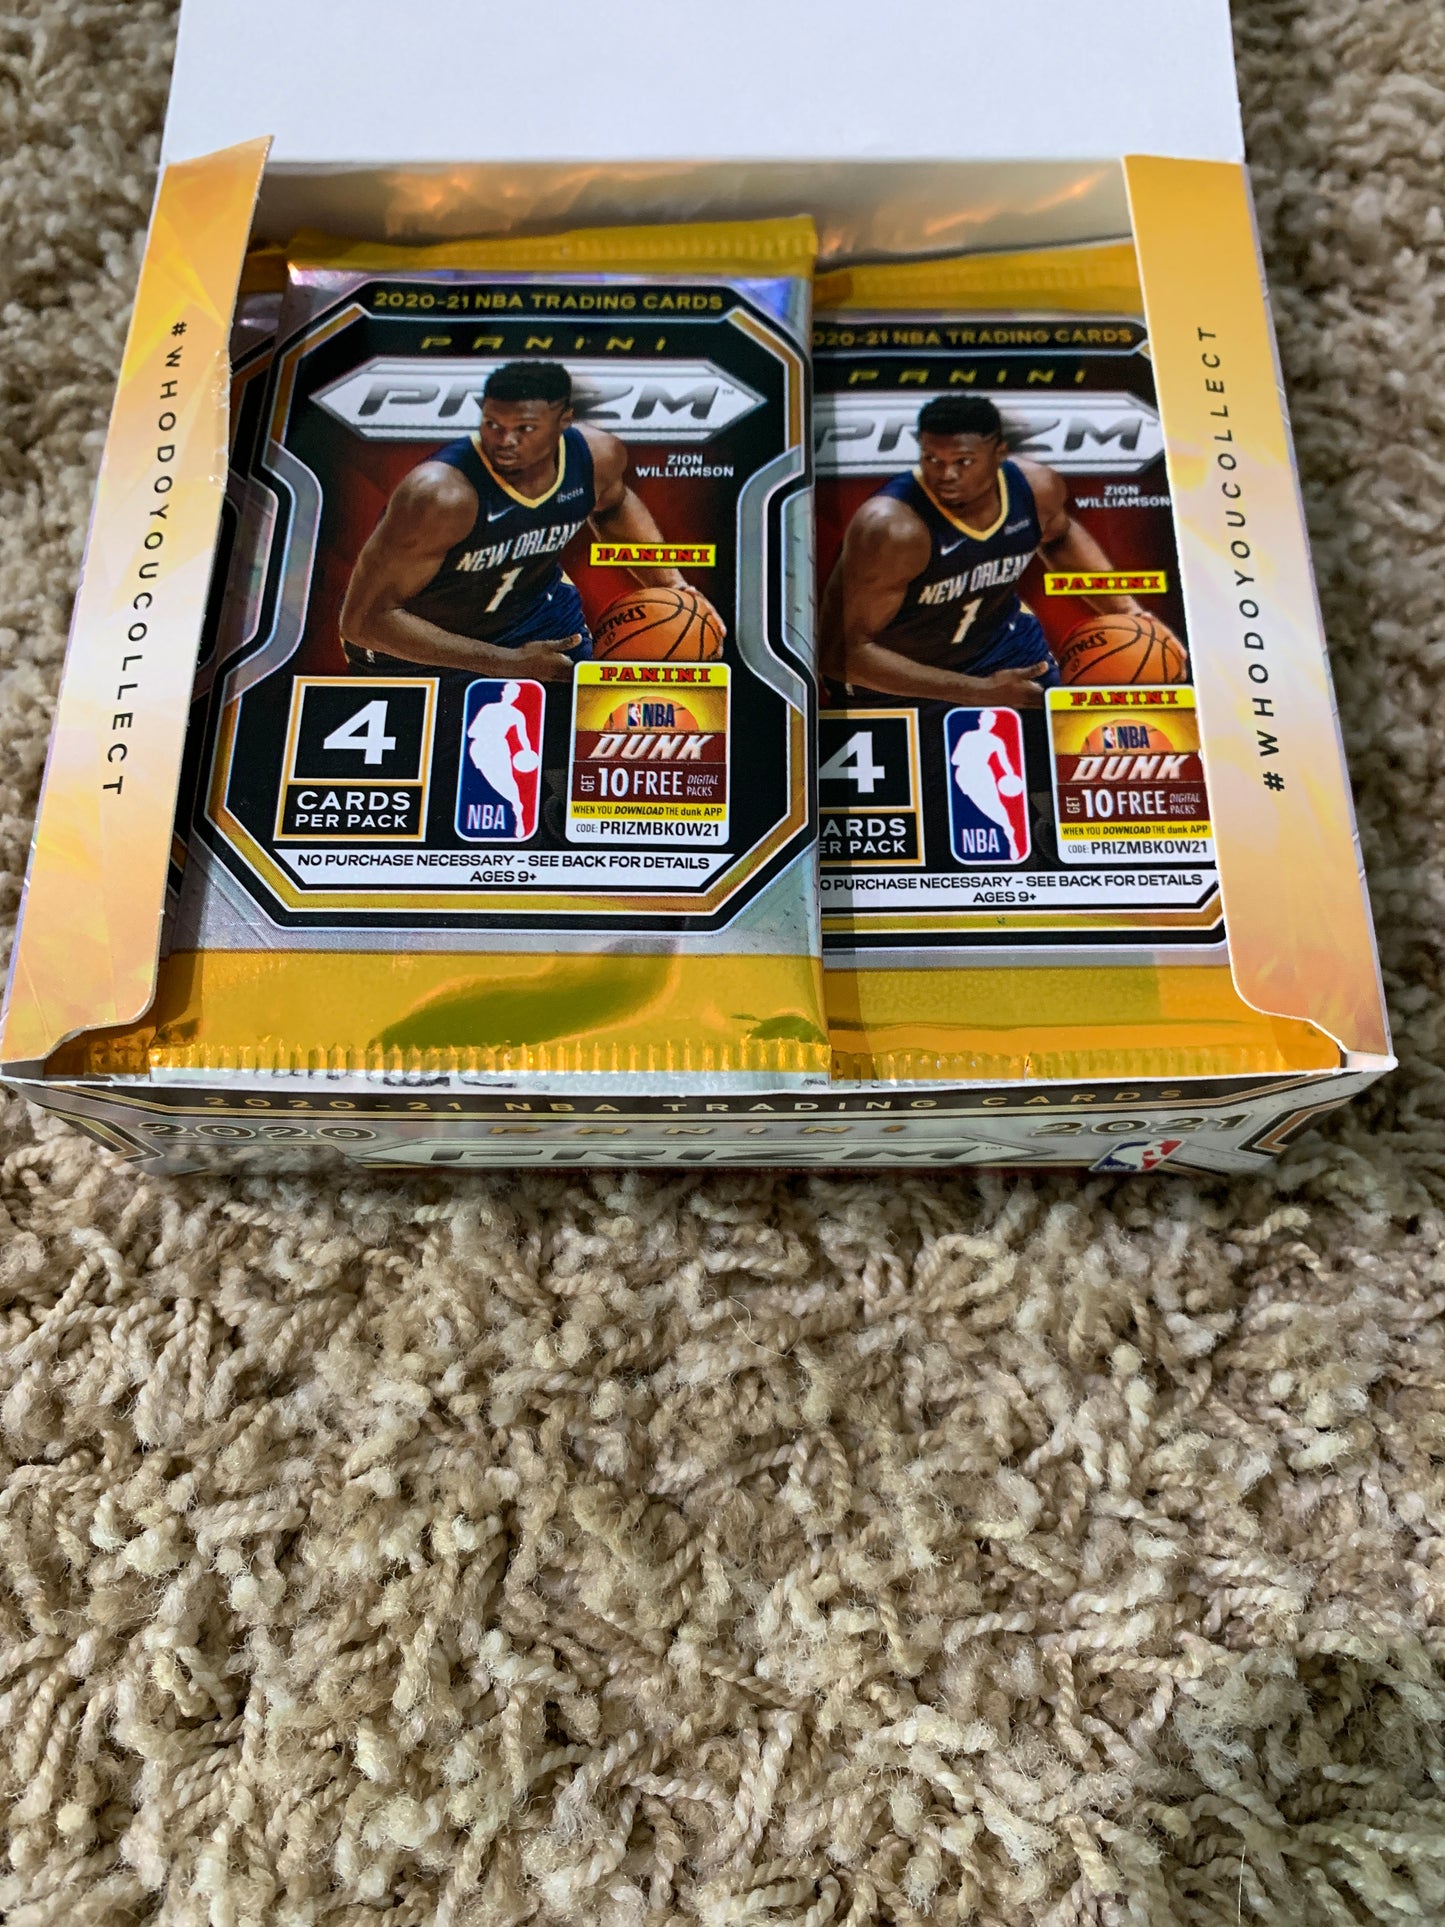 2020-2021 Panini Prizm Basketball Retail Single Pack. 1 auto possible per box, search for rookies Lamelo Ball, Wiseman and Pink Pulsar Prizms